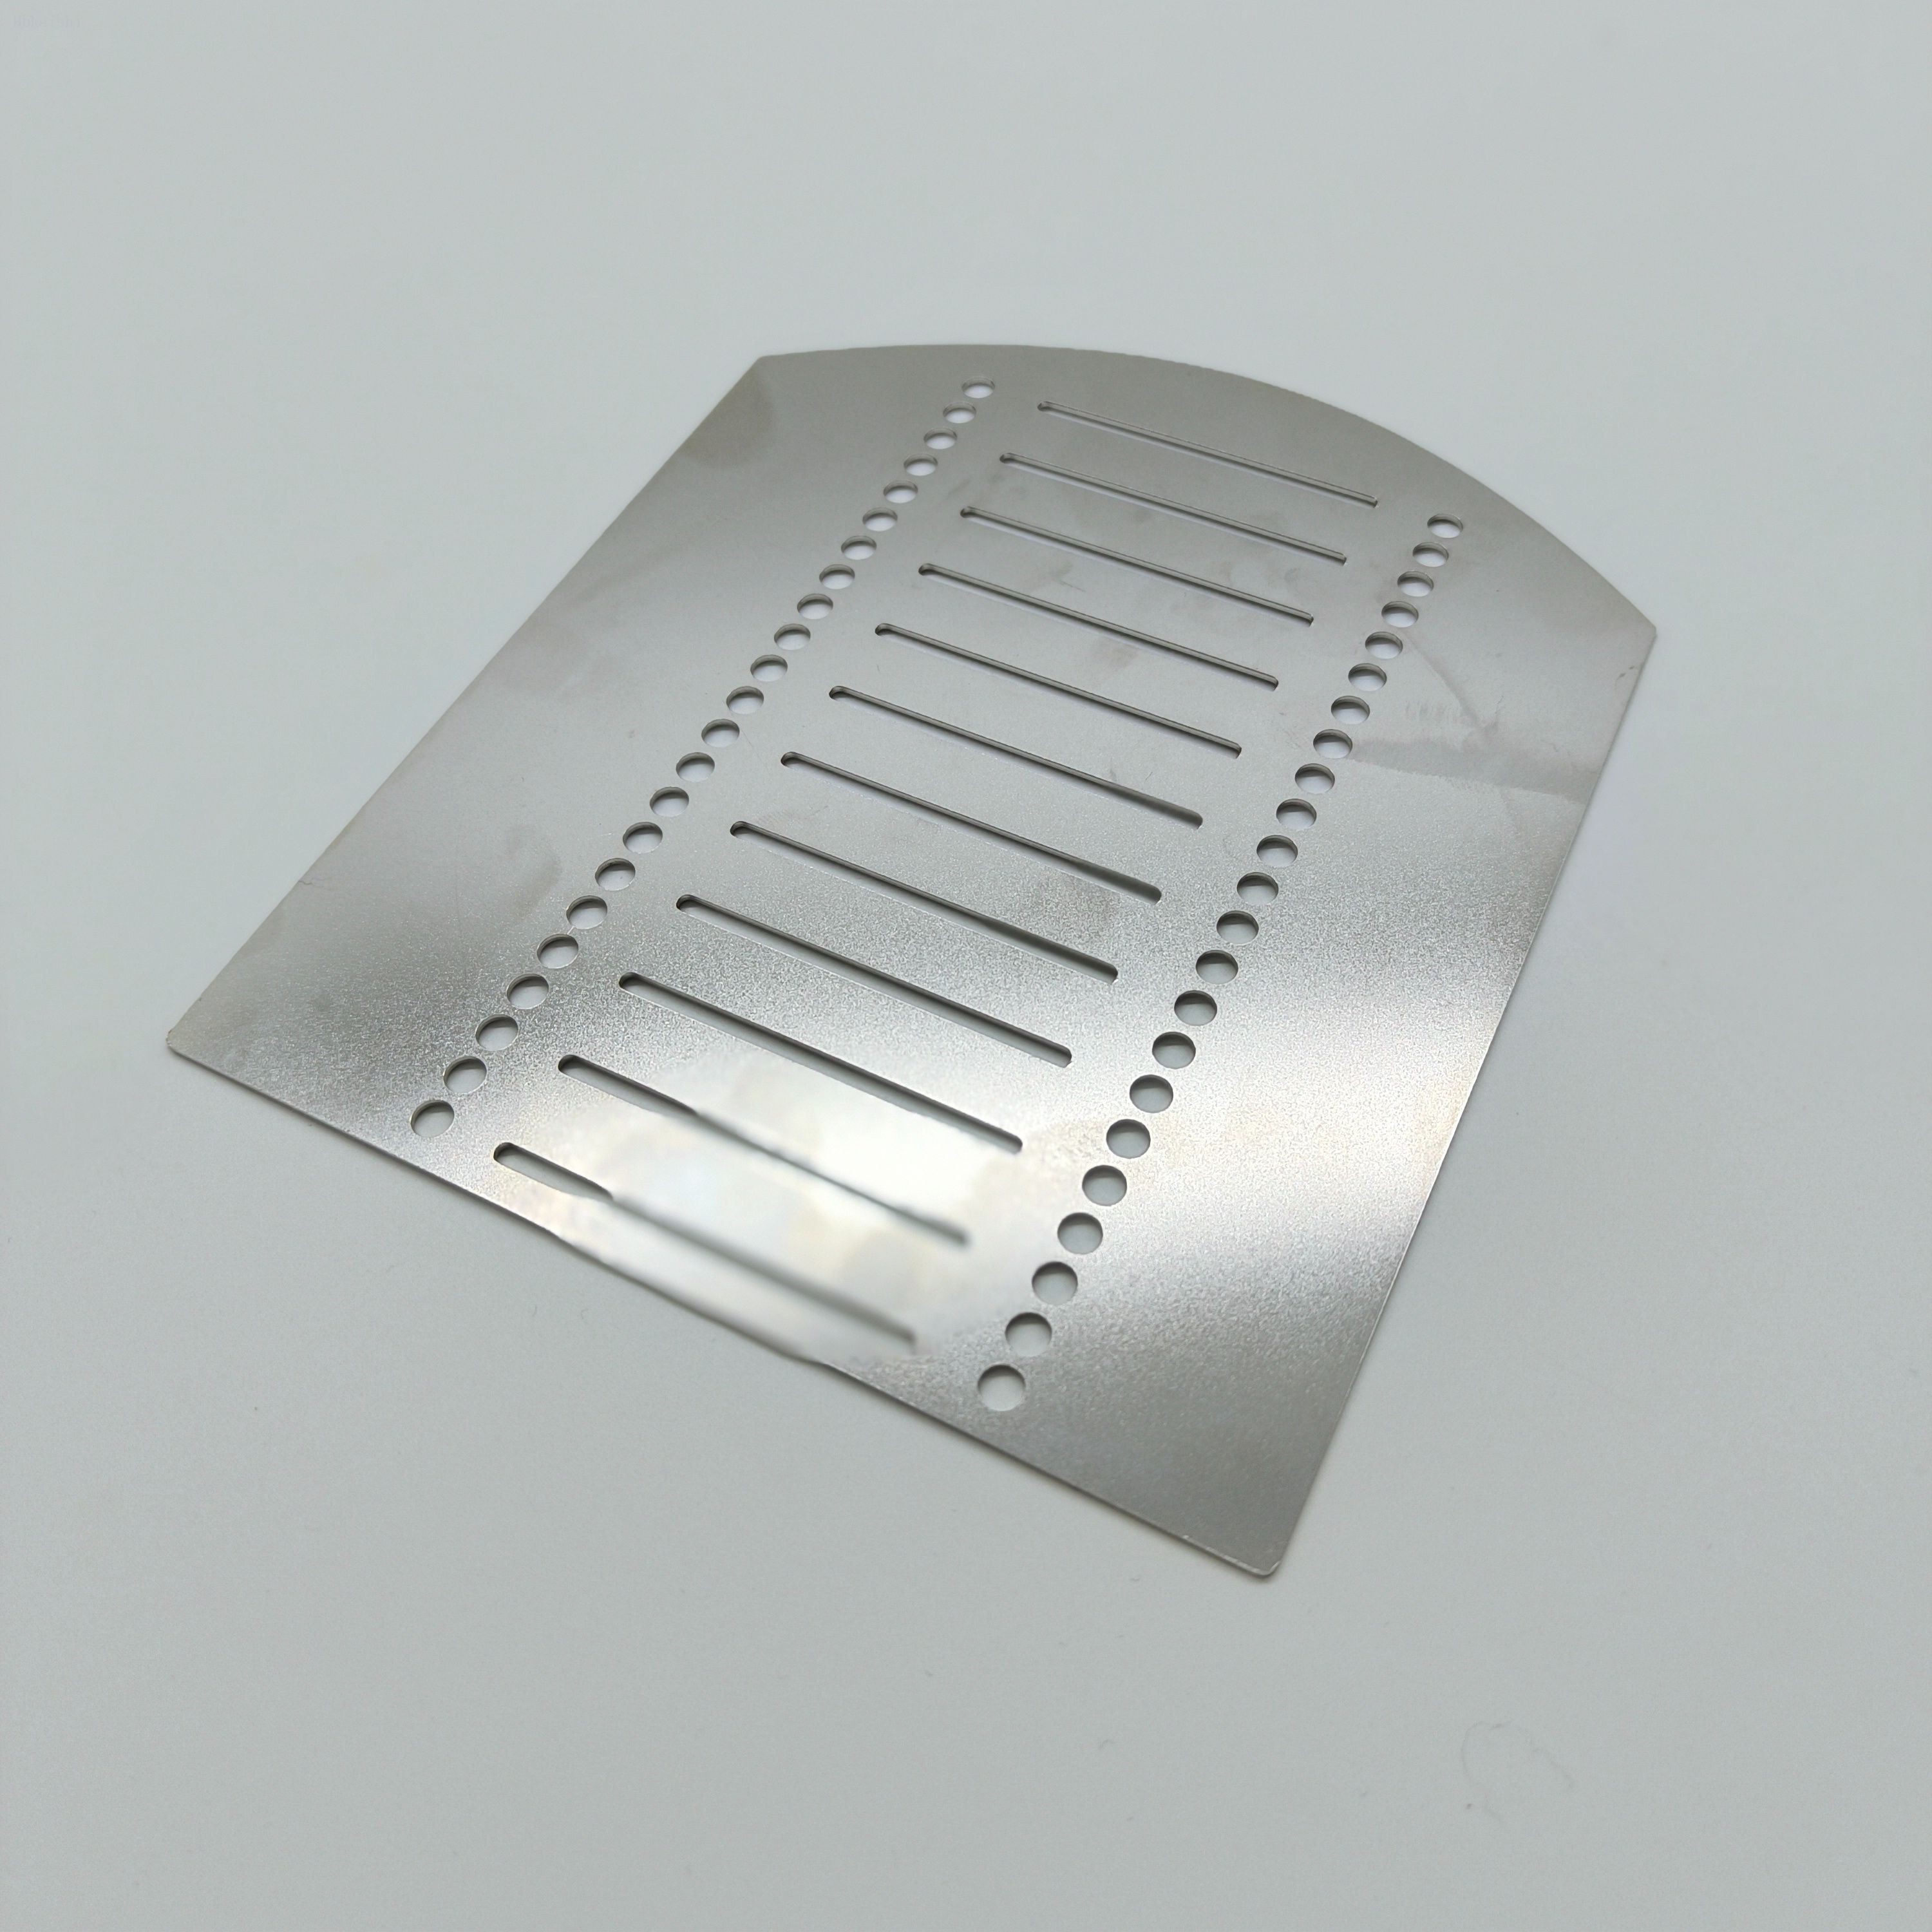 Custom Laser Cutting Stainless Steel Sheet metal Products OEM Cut Sheet Metal Fabrication Service Factory 